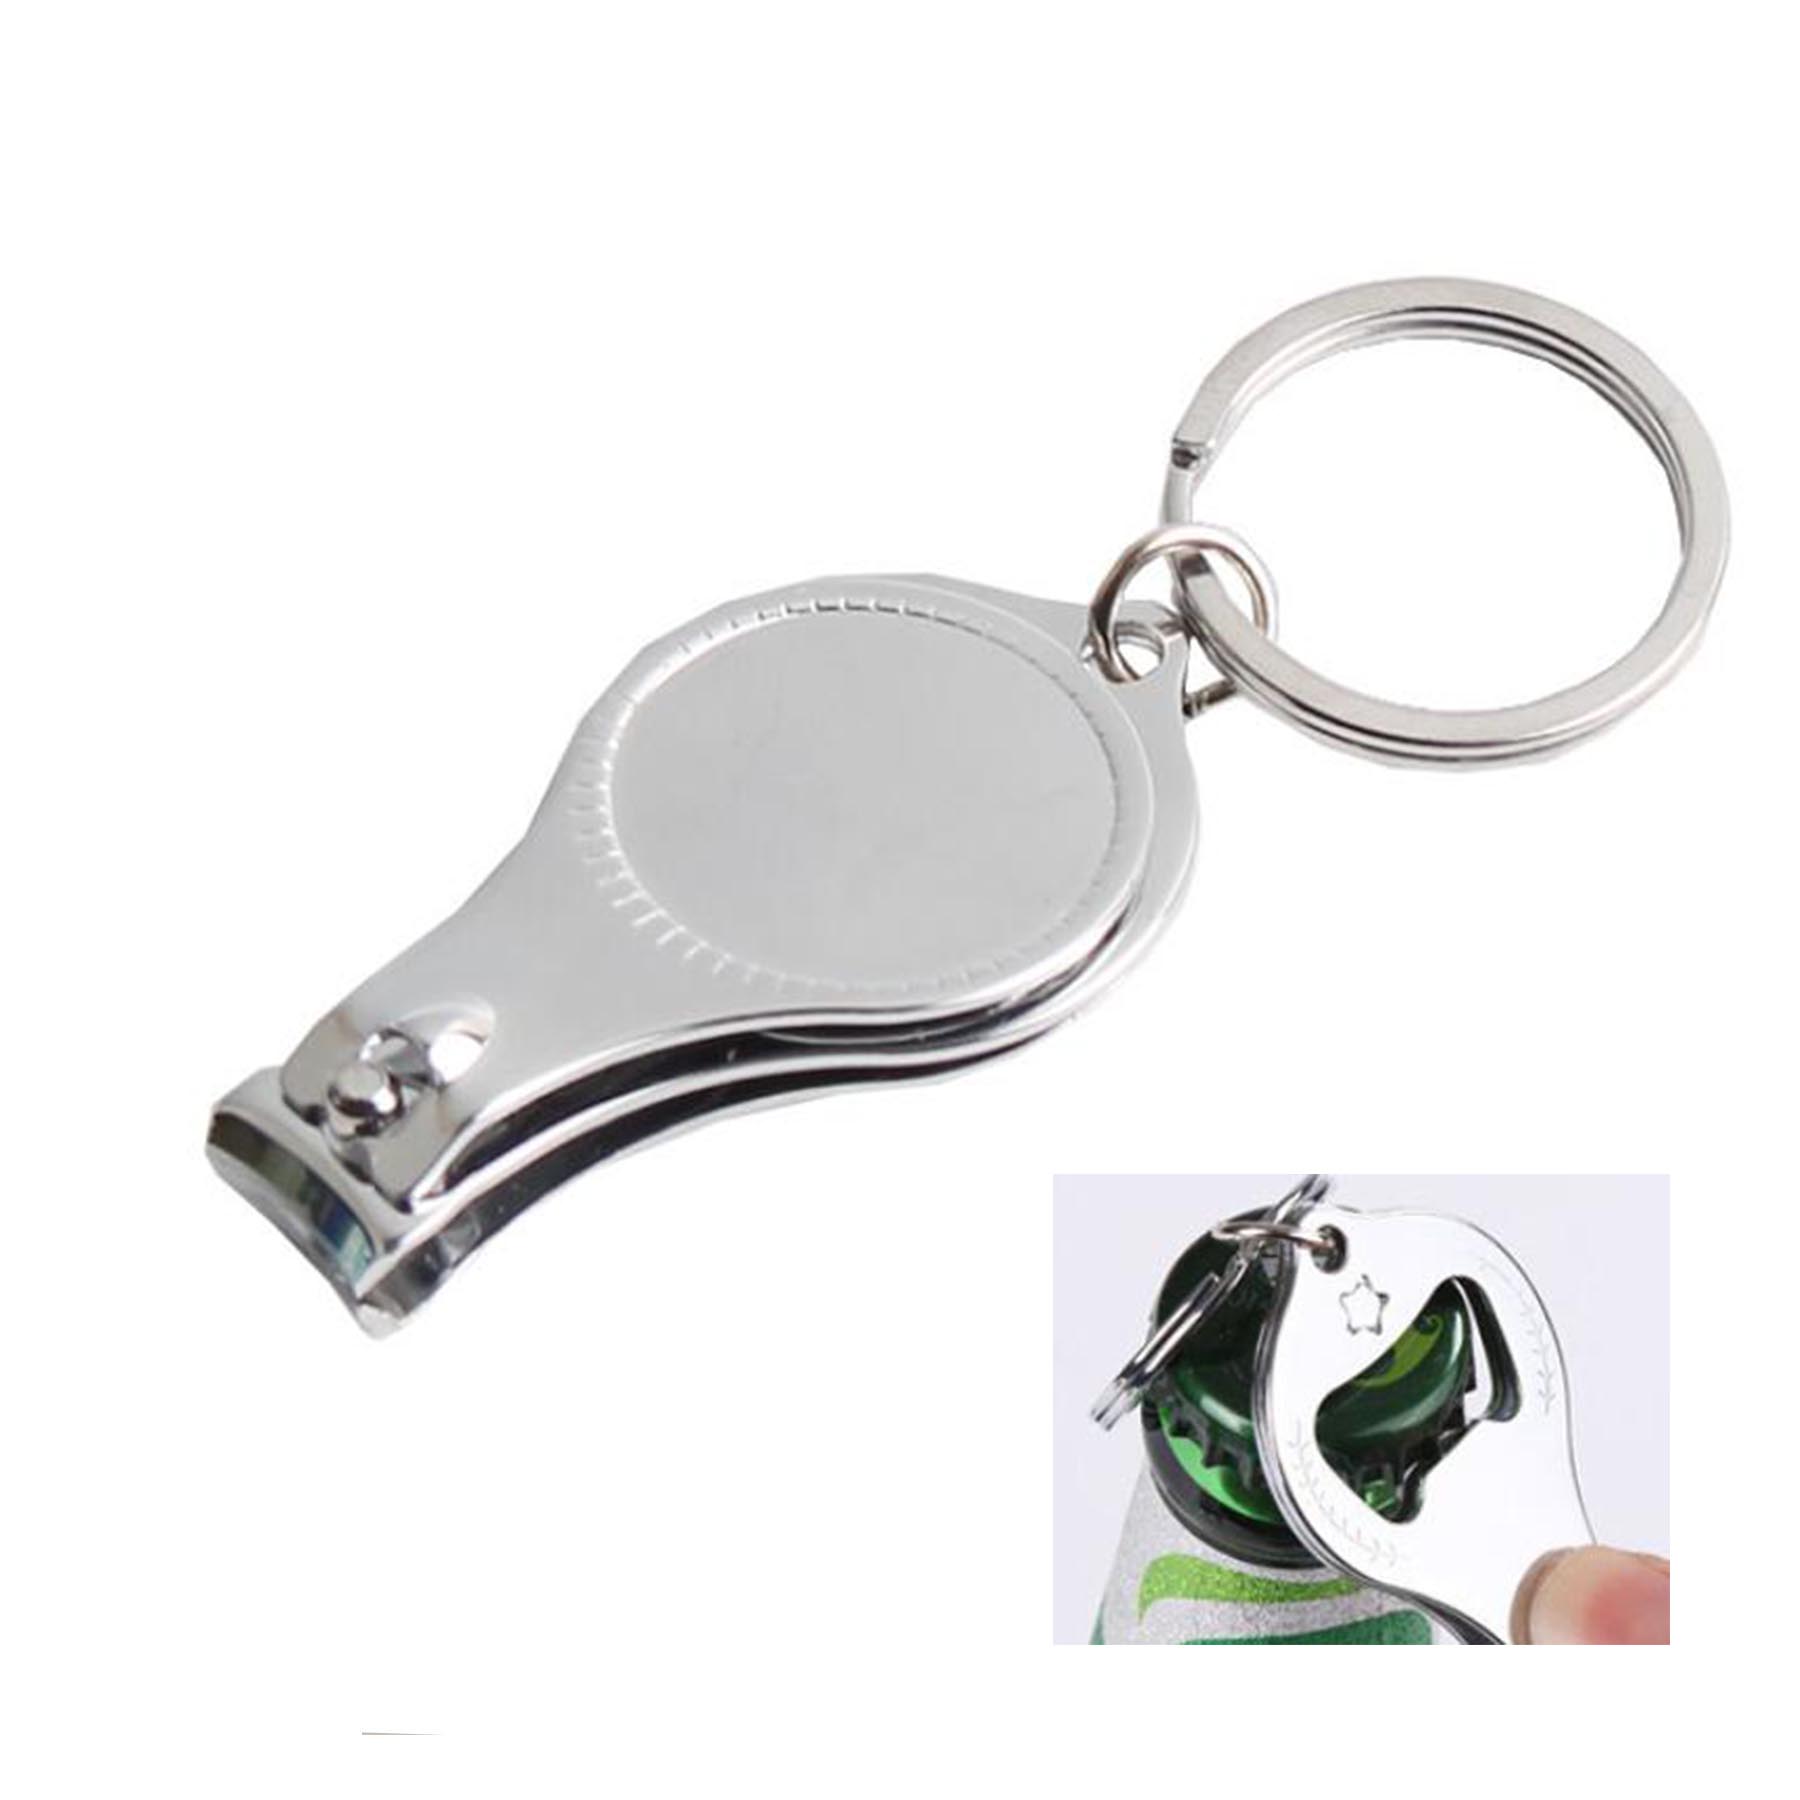 Nail clippers Key Chain